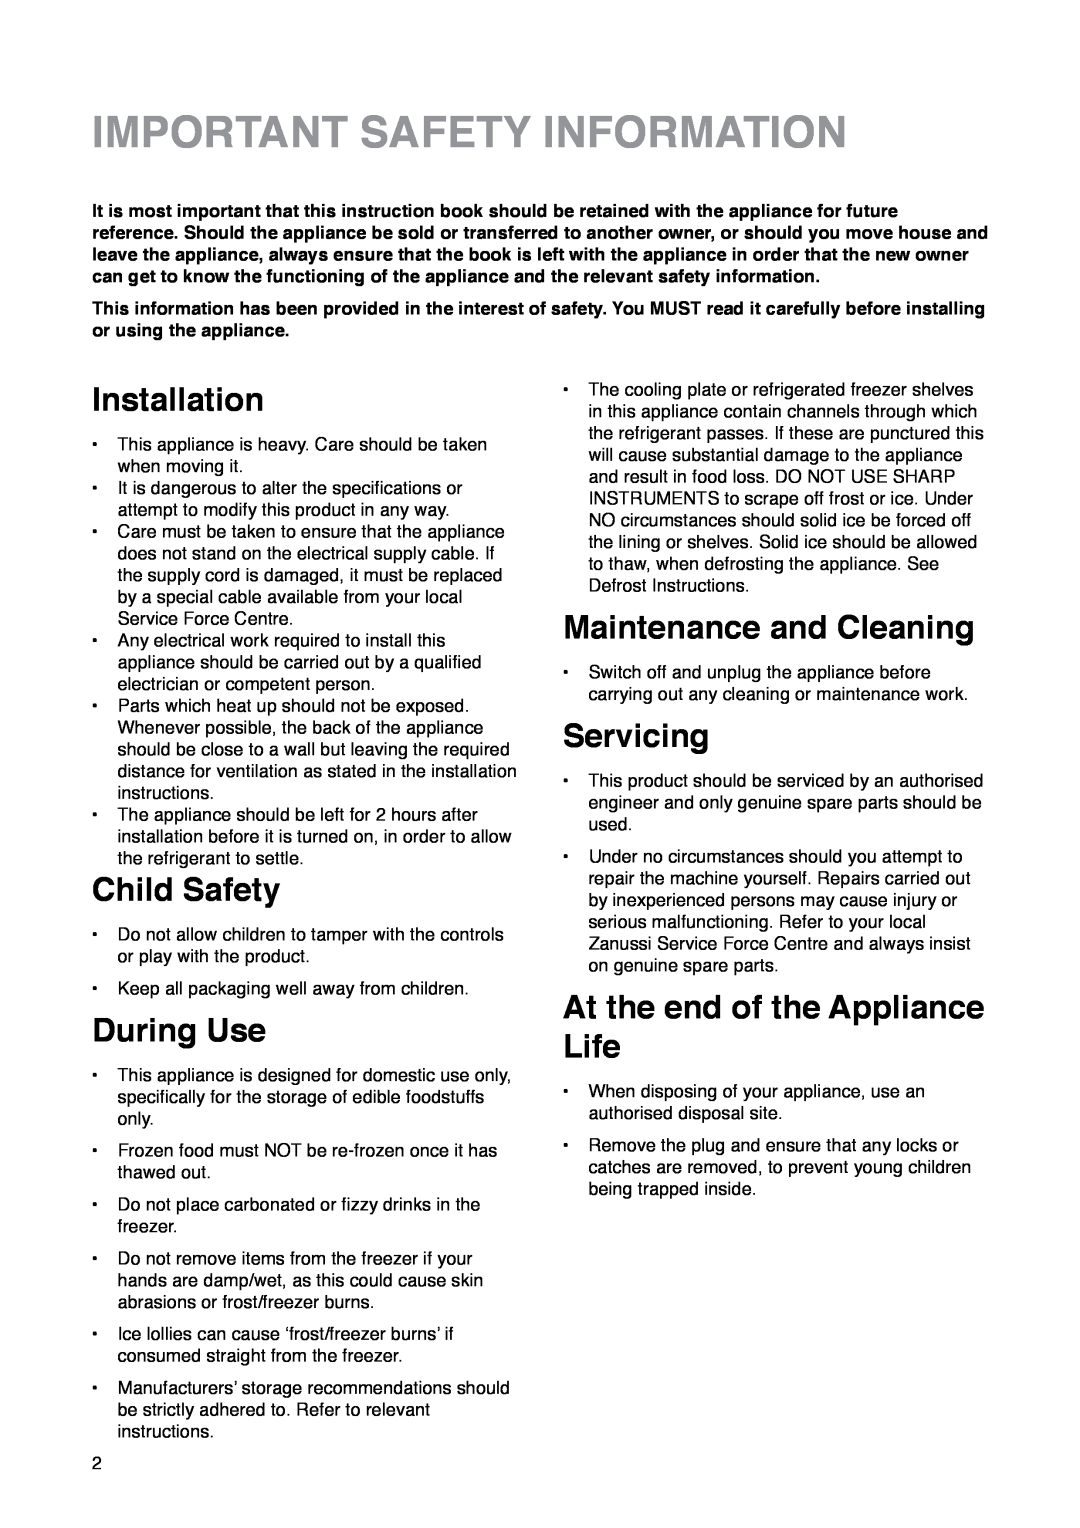 Zanussi ZI 7243 Important Safety Information, Installation, Child Safety, During Use, Maintenance and Cleaning, Servicing 